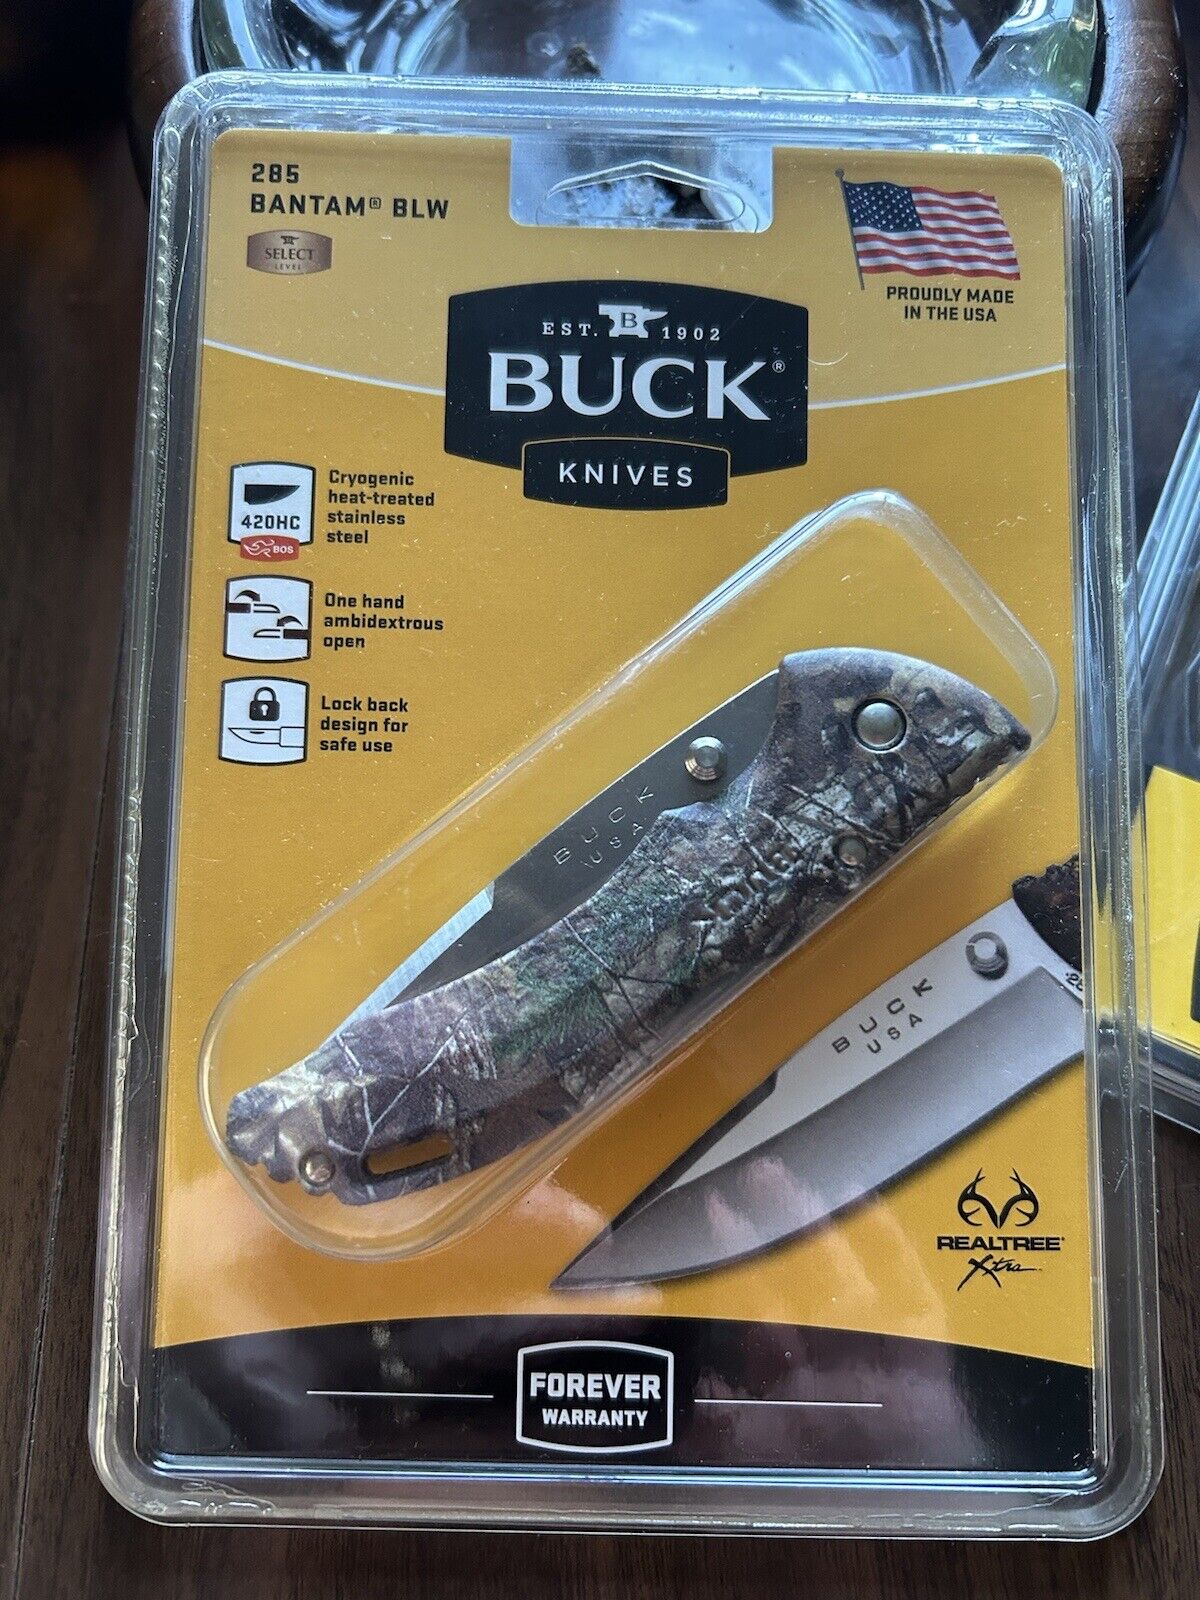 Buck Knife 285 Bantam BLW 4 Available Price Is Each